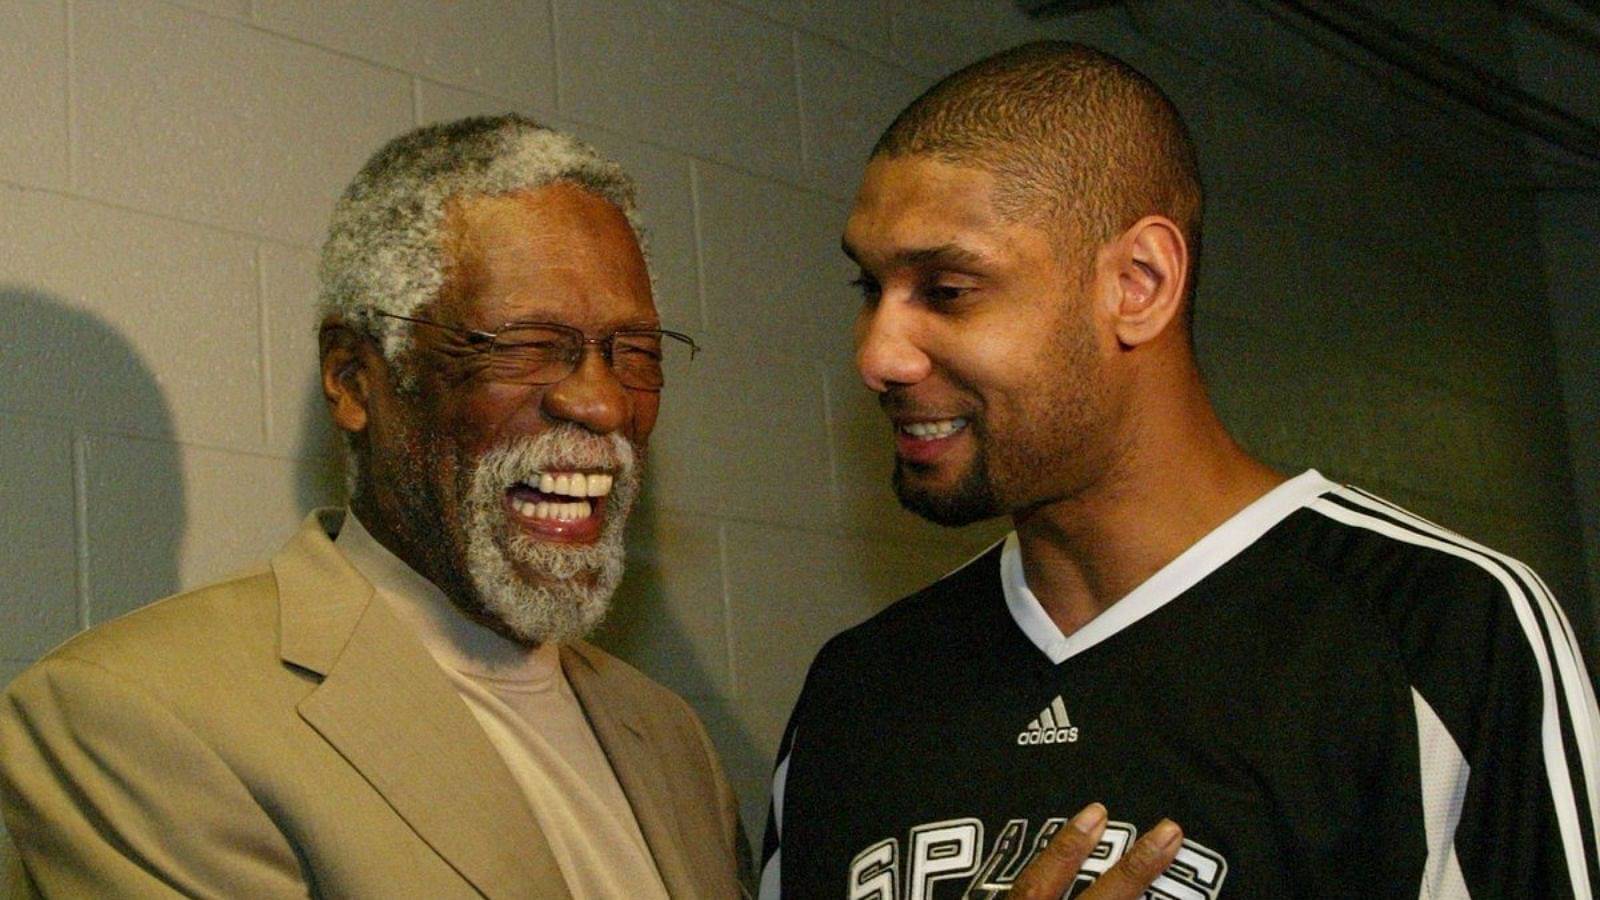 Bill Russell asked Tim Duncan to be a pallbearer at his funeral, much like he was asked by Jackie Robinson’s wife